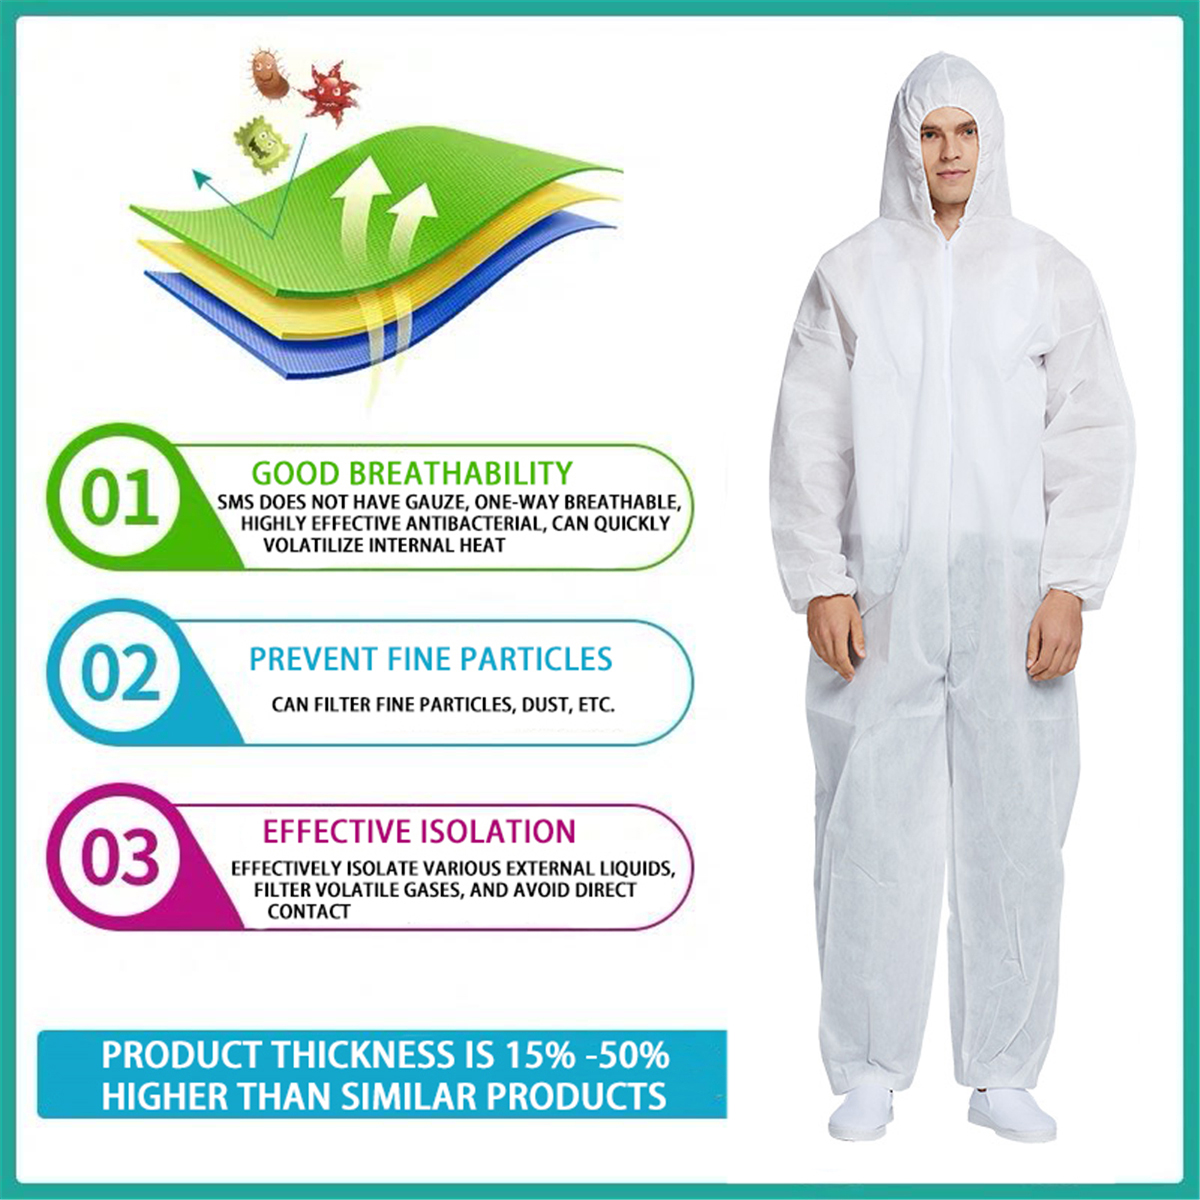 Disposable-Non-woven-Siamese-Protective-Suit-Anti-fog-Dust-proof-Anti-spit-Isolation-clothing-Cloth-1657155-4